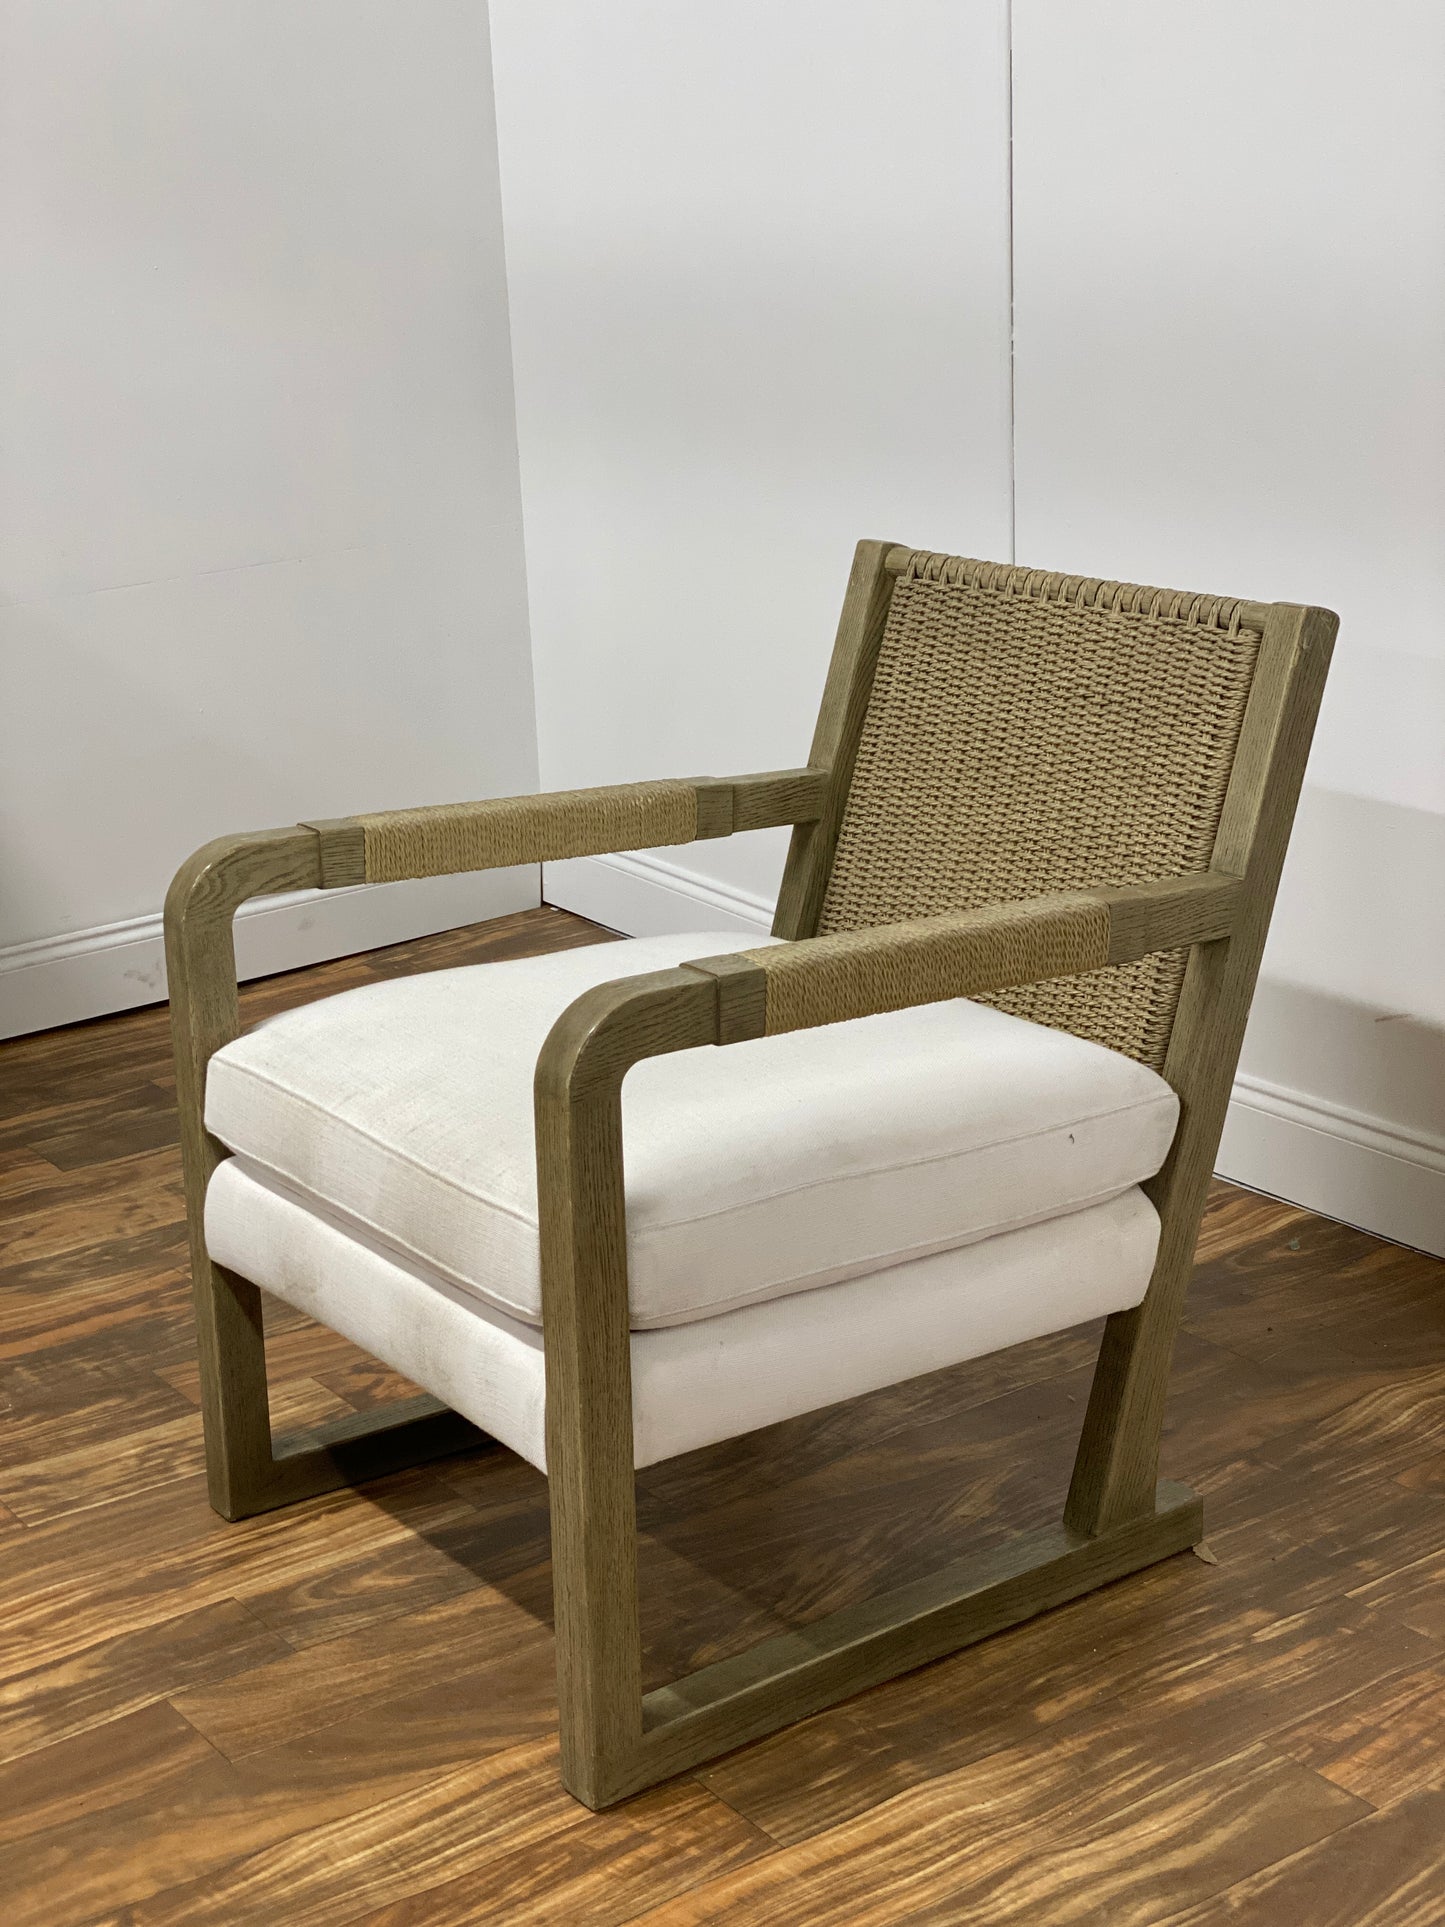 OAK ARM CHAIR WITH WICKER BACK AND SISAL ARM REST